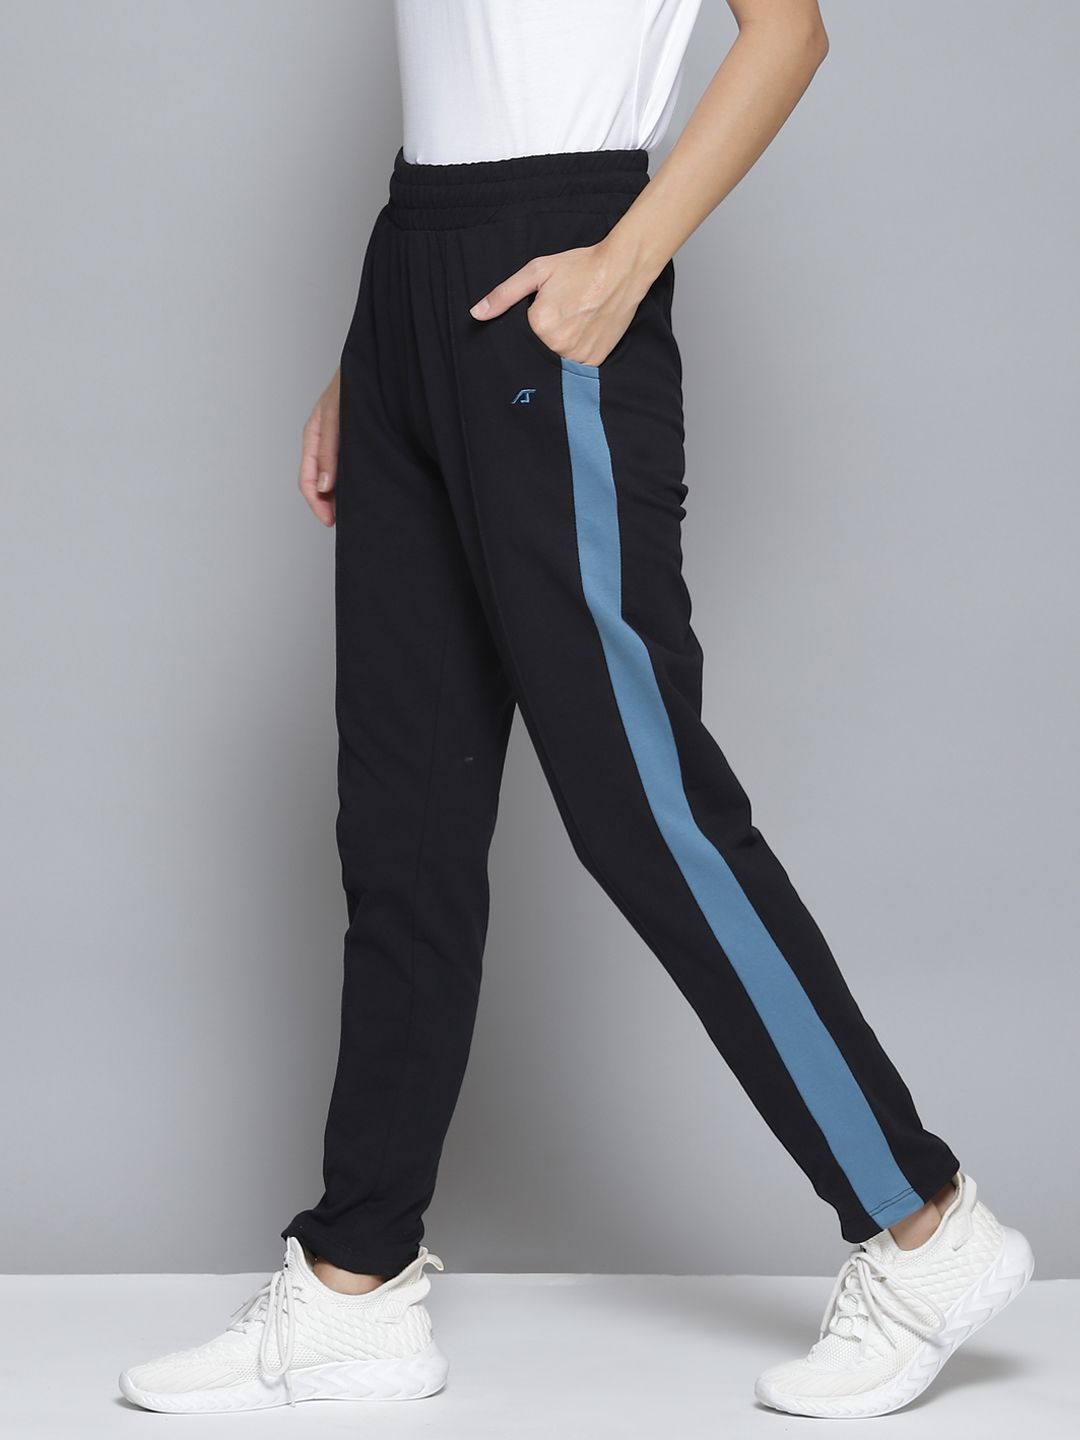 Alcis Women Black & Blue Striped Slim-Fit Track Pants Price in India